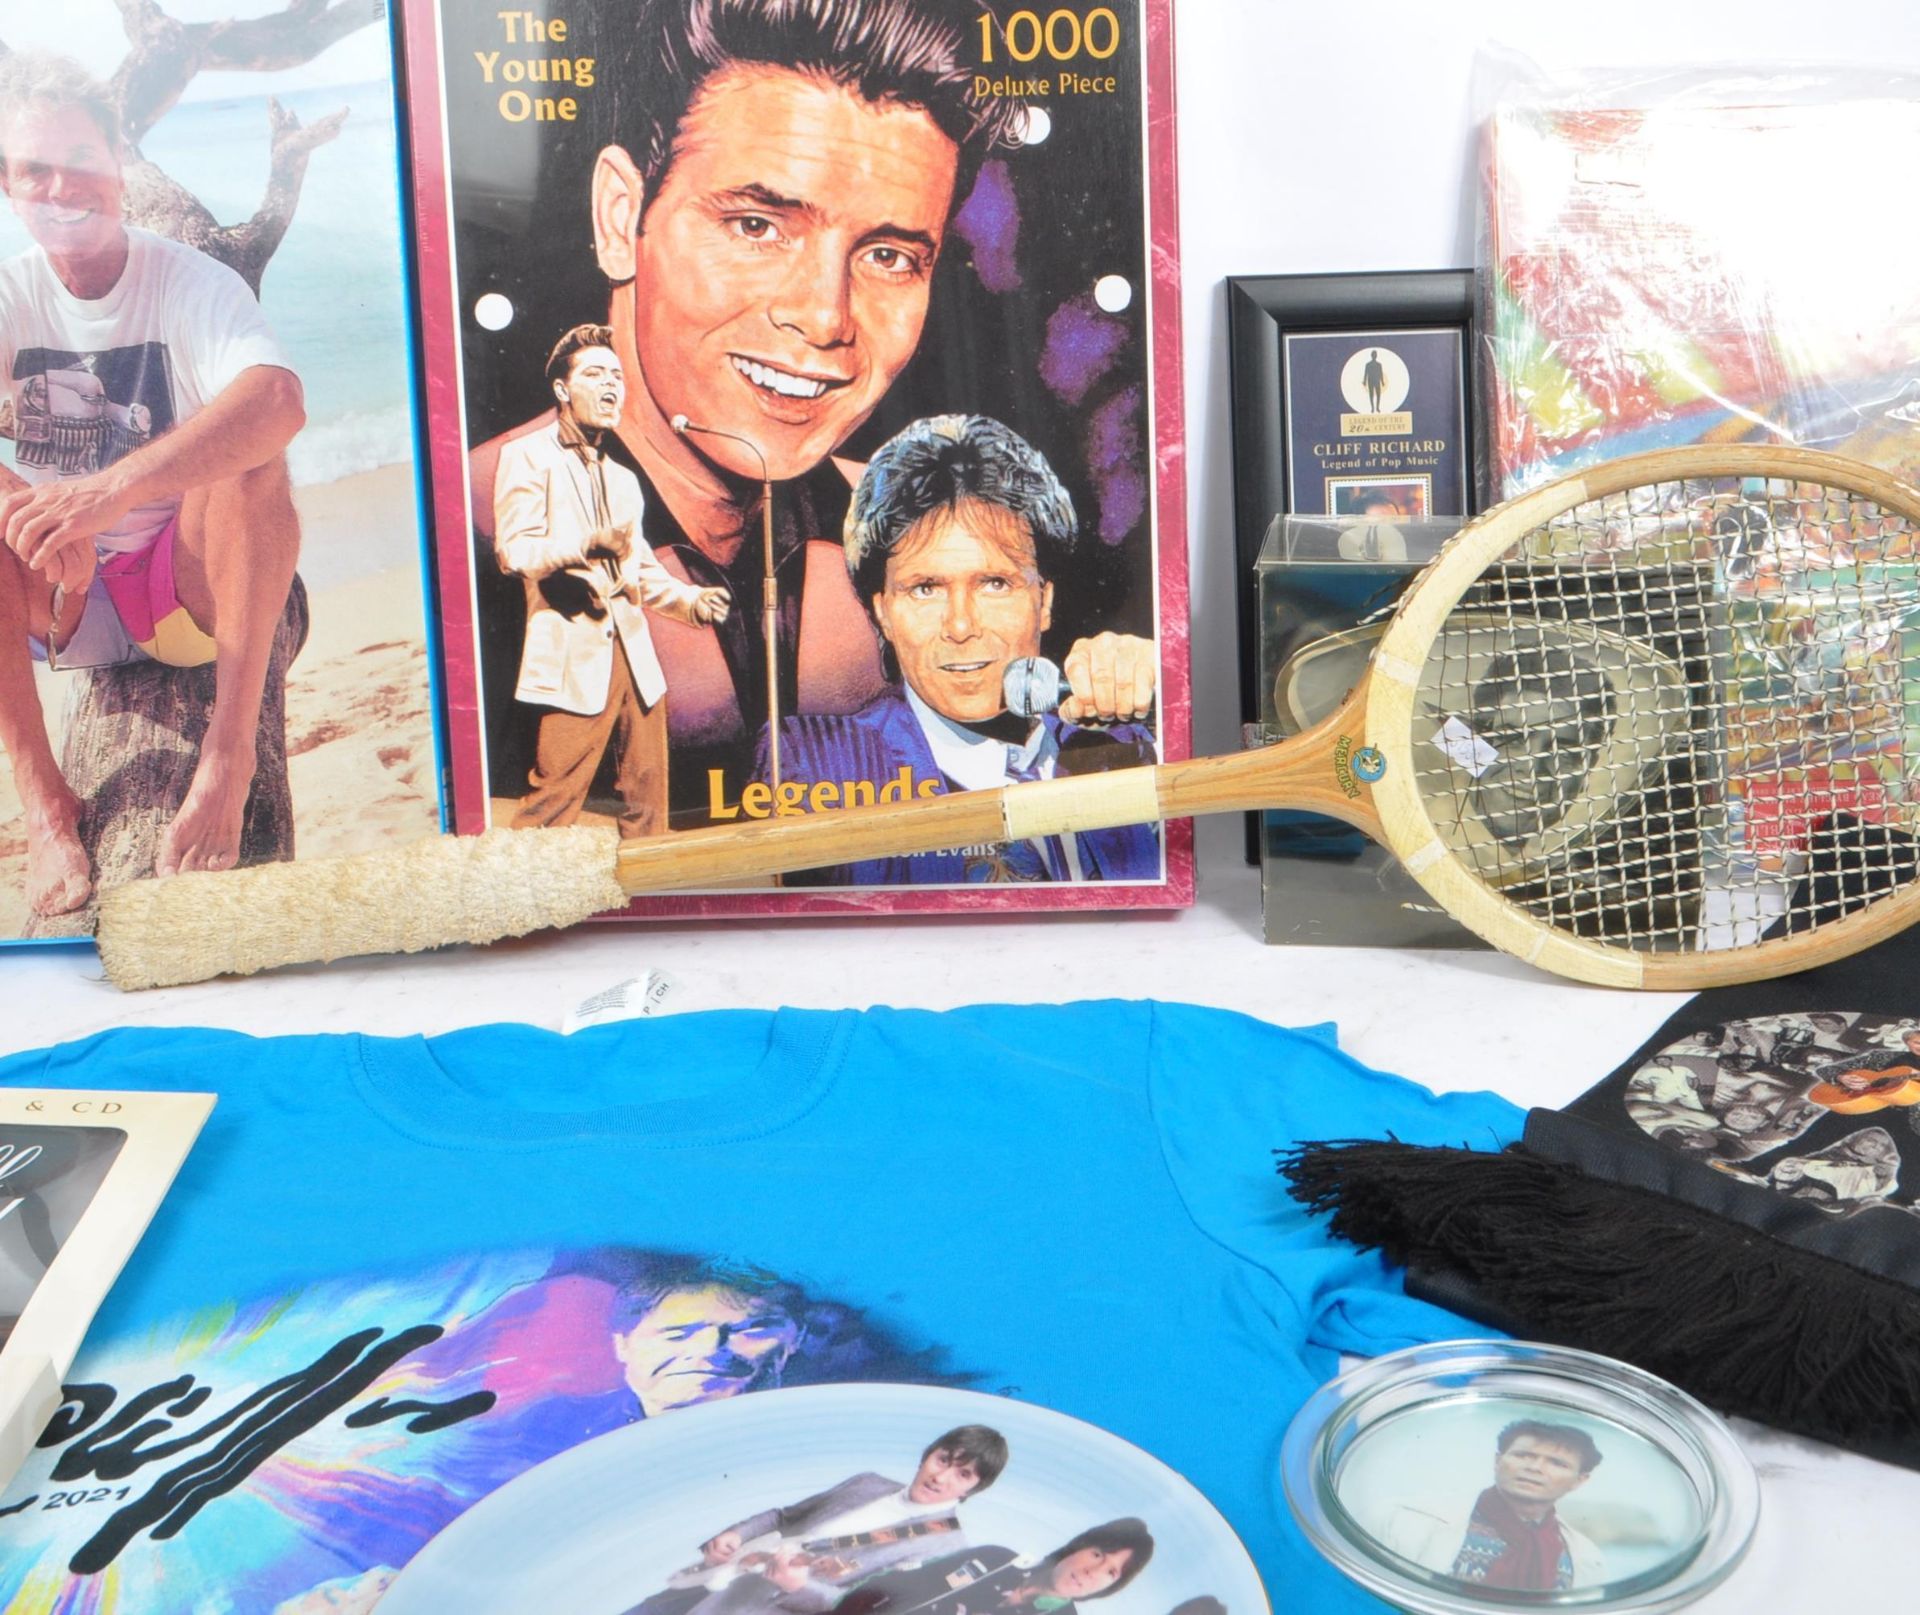 SIR CLIFF RICHARD - COLLECTION OF MEMORABILIA / MERCHANDISE - Image 5 of 6